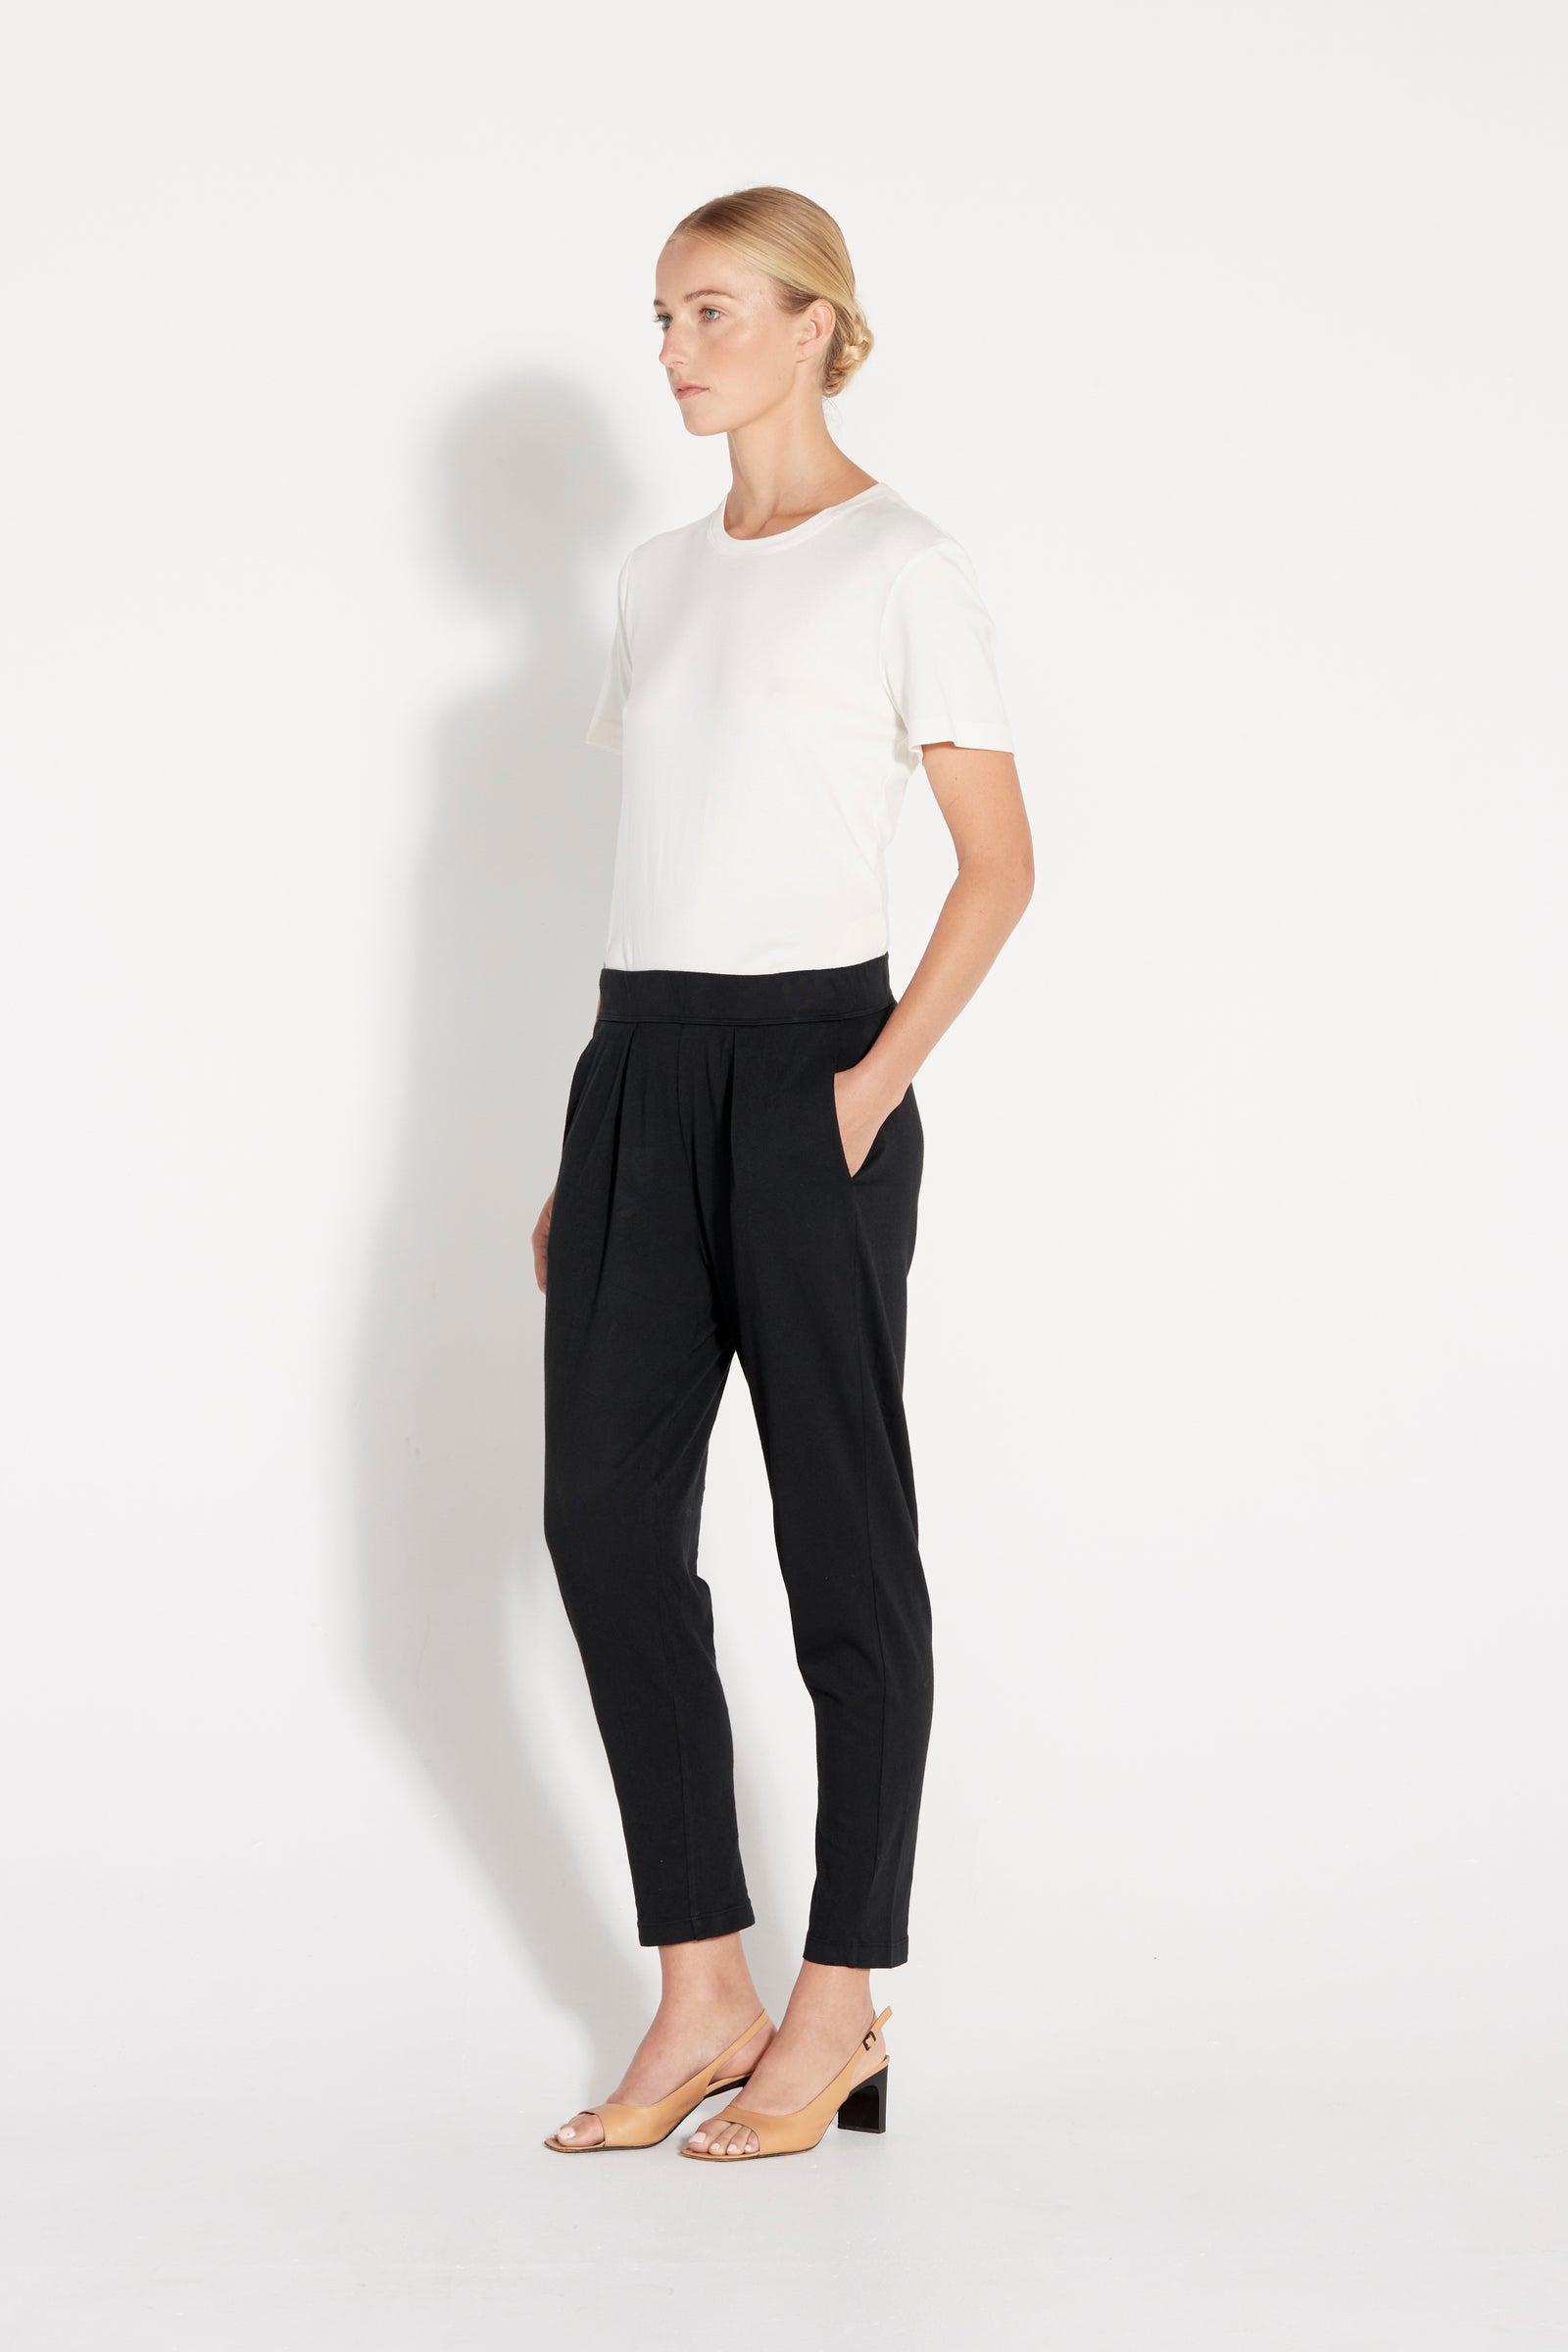 Black Classic Jersey Easy Pant Full Side View